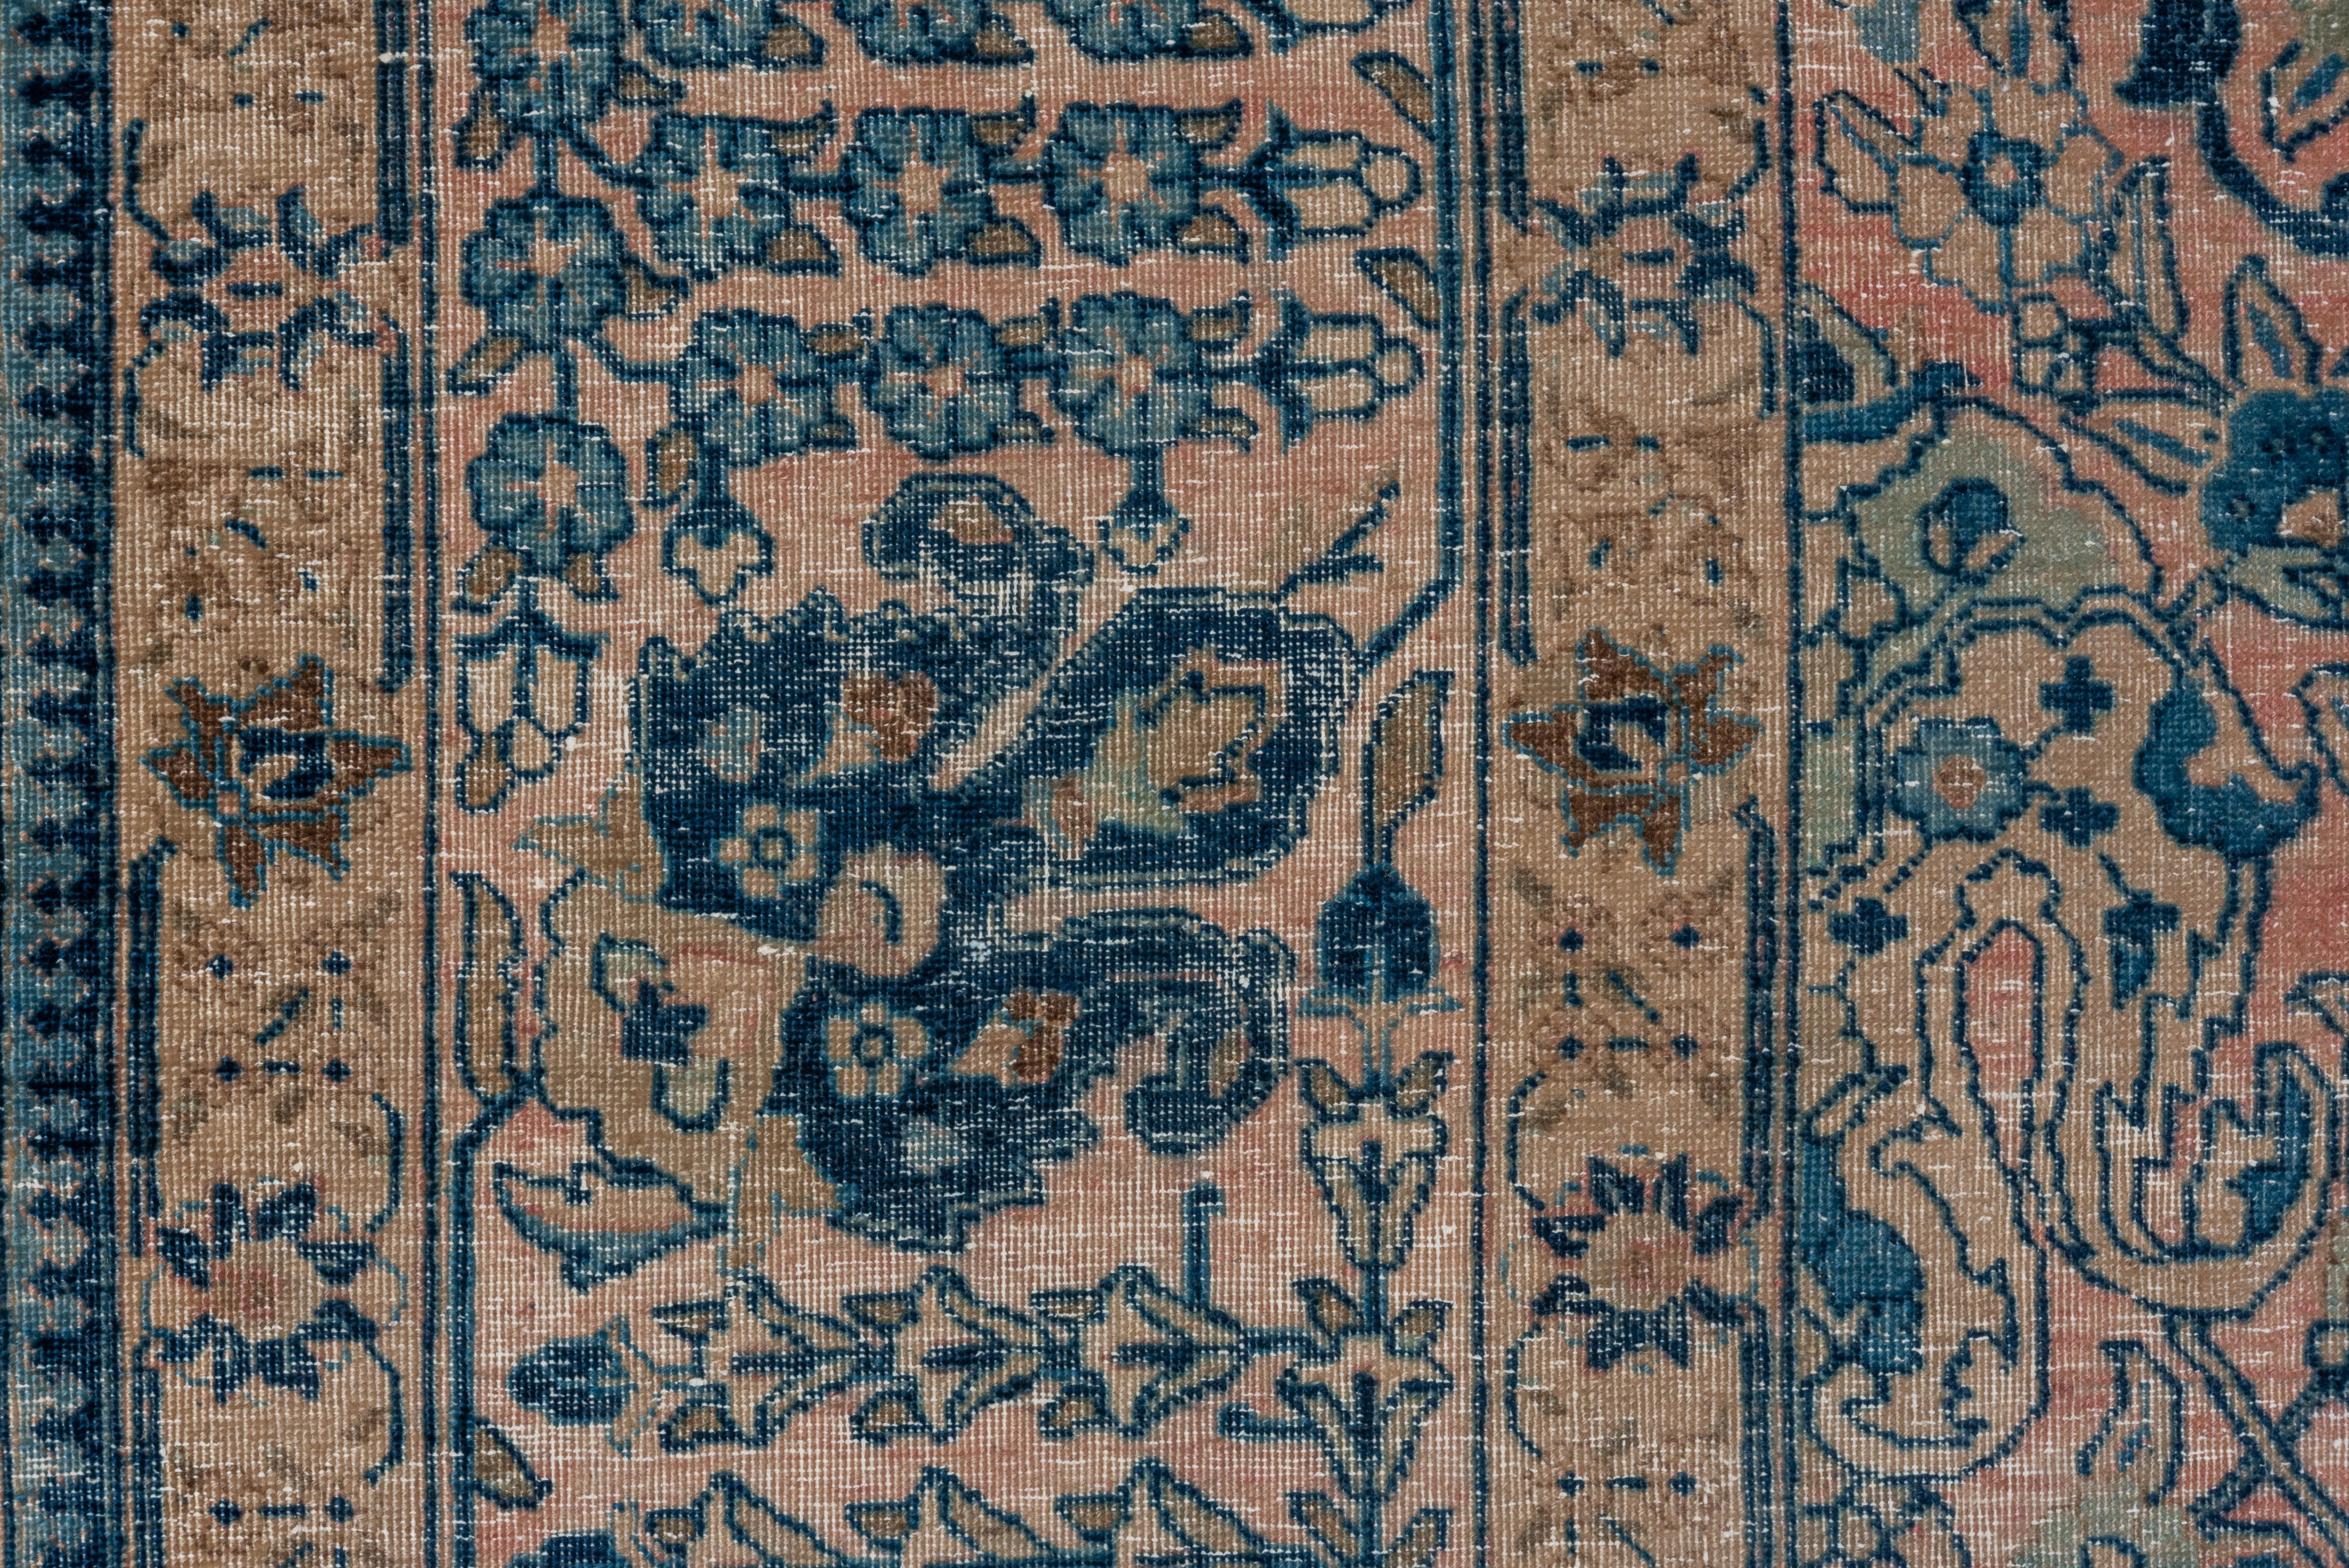 No medallion, but an allover panel design delineated by a serpentine meander lattice, all enclosing oval palmettes, cloud bands, dot arrays and cogwheel rosettes. Ivory and pink ground with accents in various blues. Iris anthora palmettes, petal